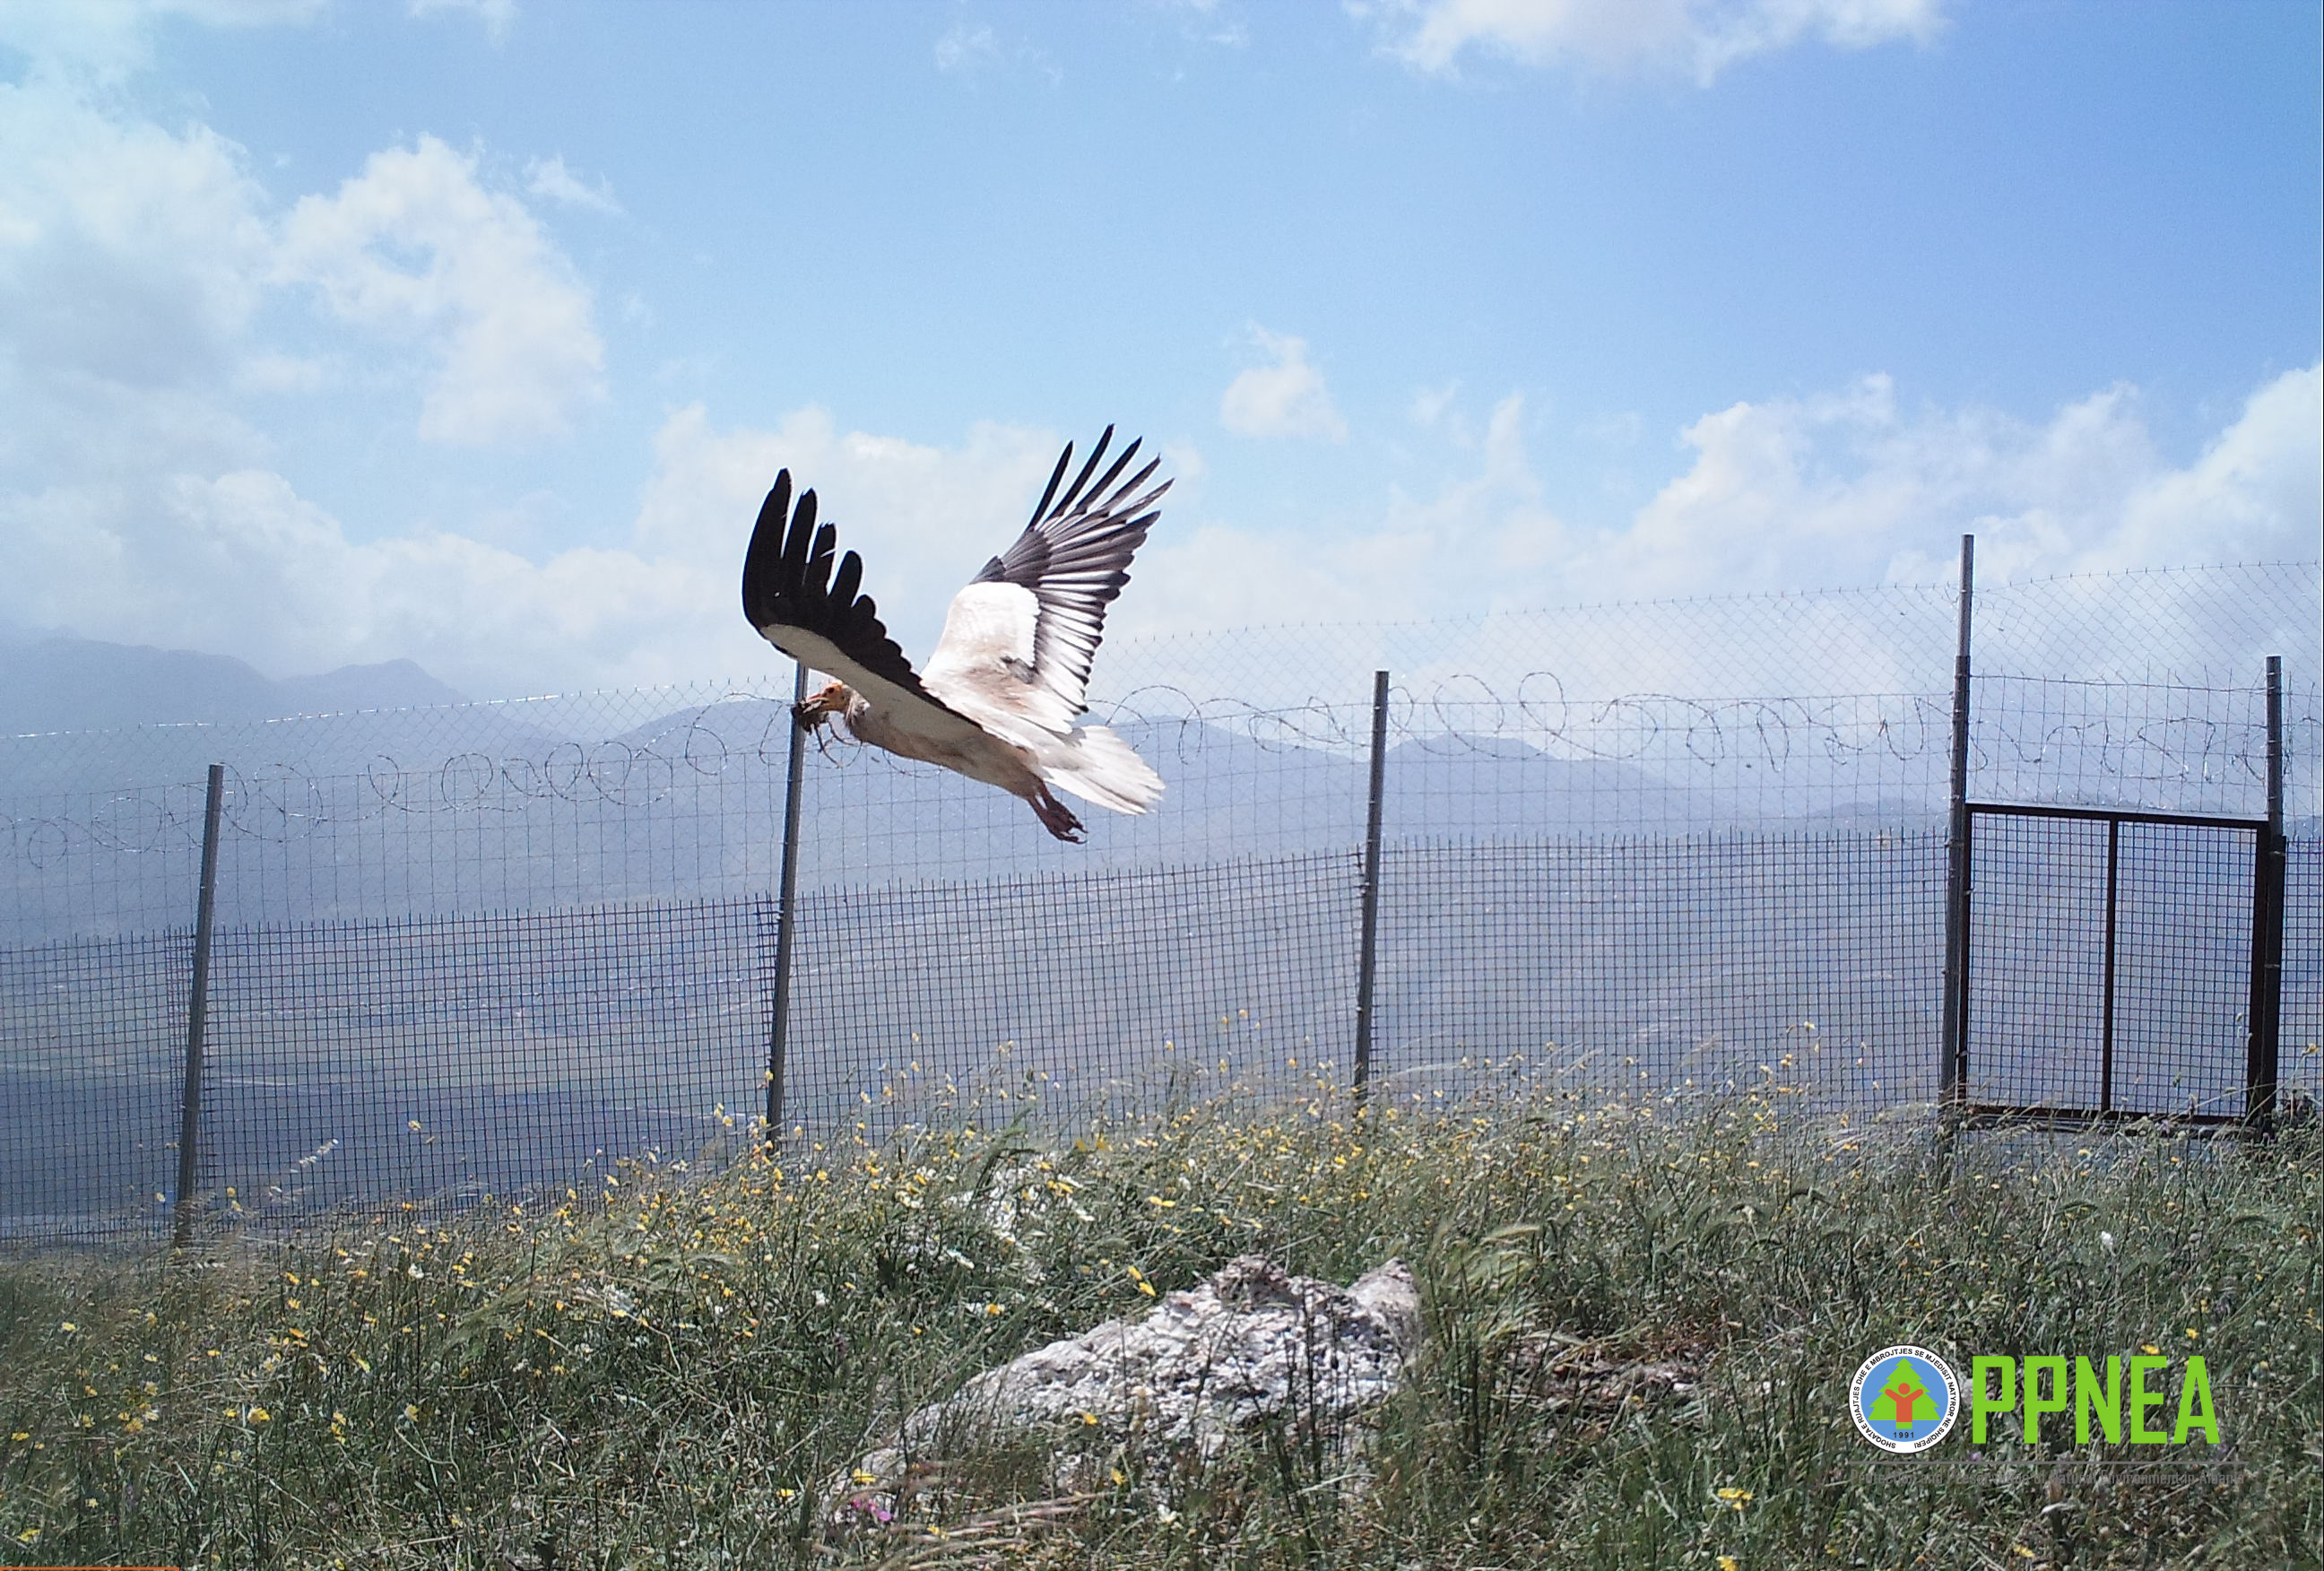 Egyptian vulture and poisoning in Albania: A destructive practice PPNEA is trying to address